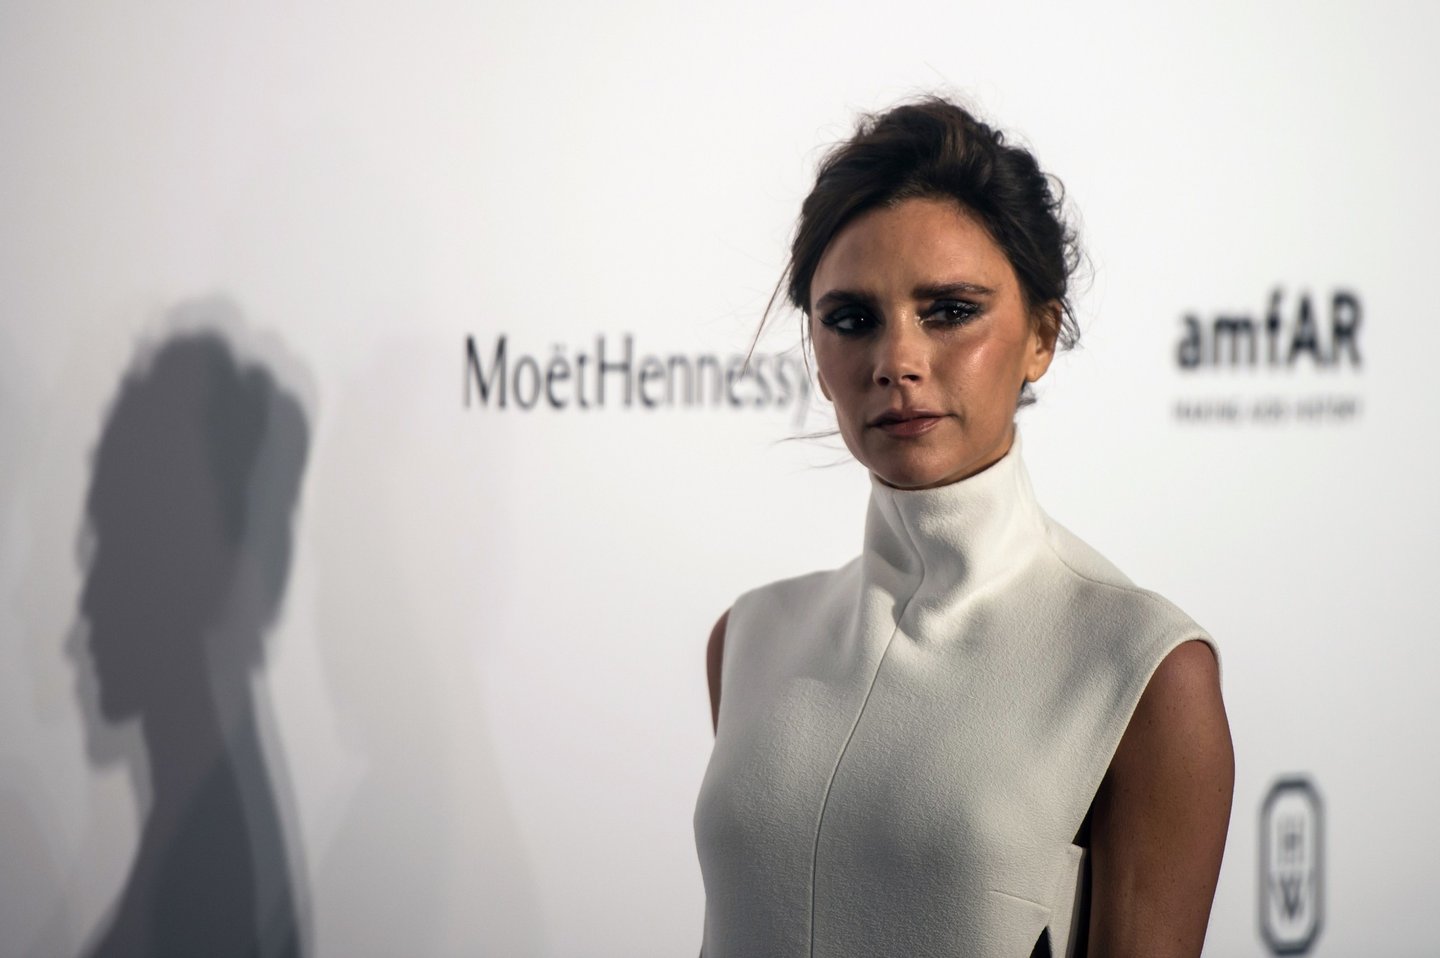 British fashion designer and singer Victoria Beckham poses as she arrives on the red carpet during the 2015 amfAR Hong Kong gala at Shaw Studios in Hong Kong on March 14, 2015. amfAR, The Foundation for AIDS Research, held its inaugural fundraising gala in Hong Kong on March 14. AFP PHOTO / ANTHONY WALLACE (Photo credit should read ANTHONY WALLACE/AFP/Getty Images)